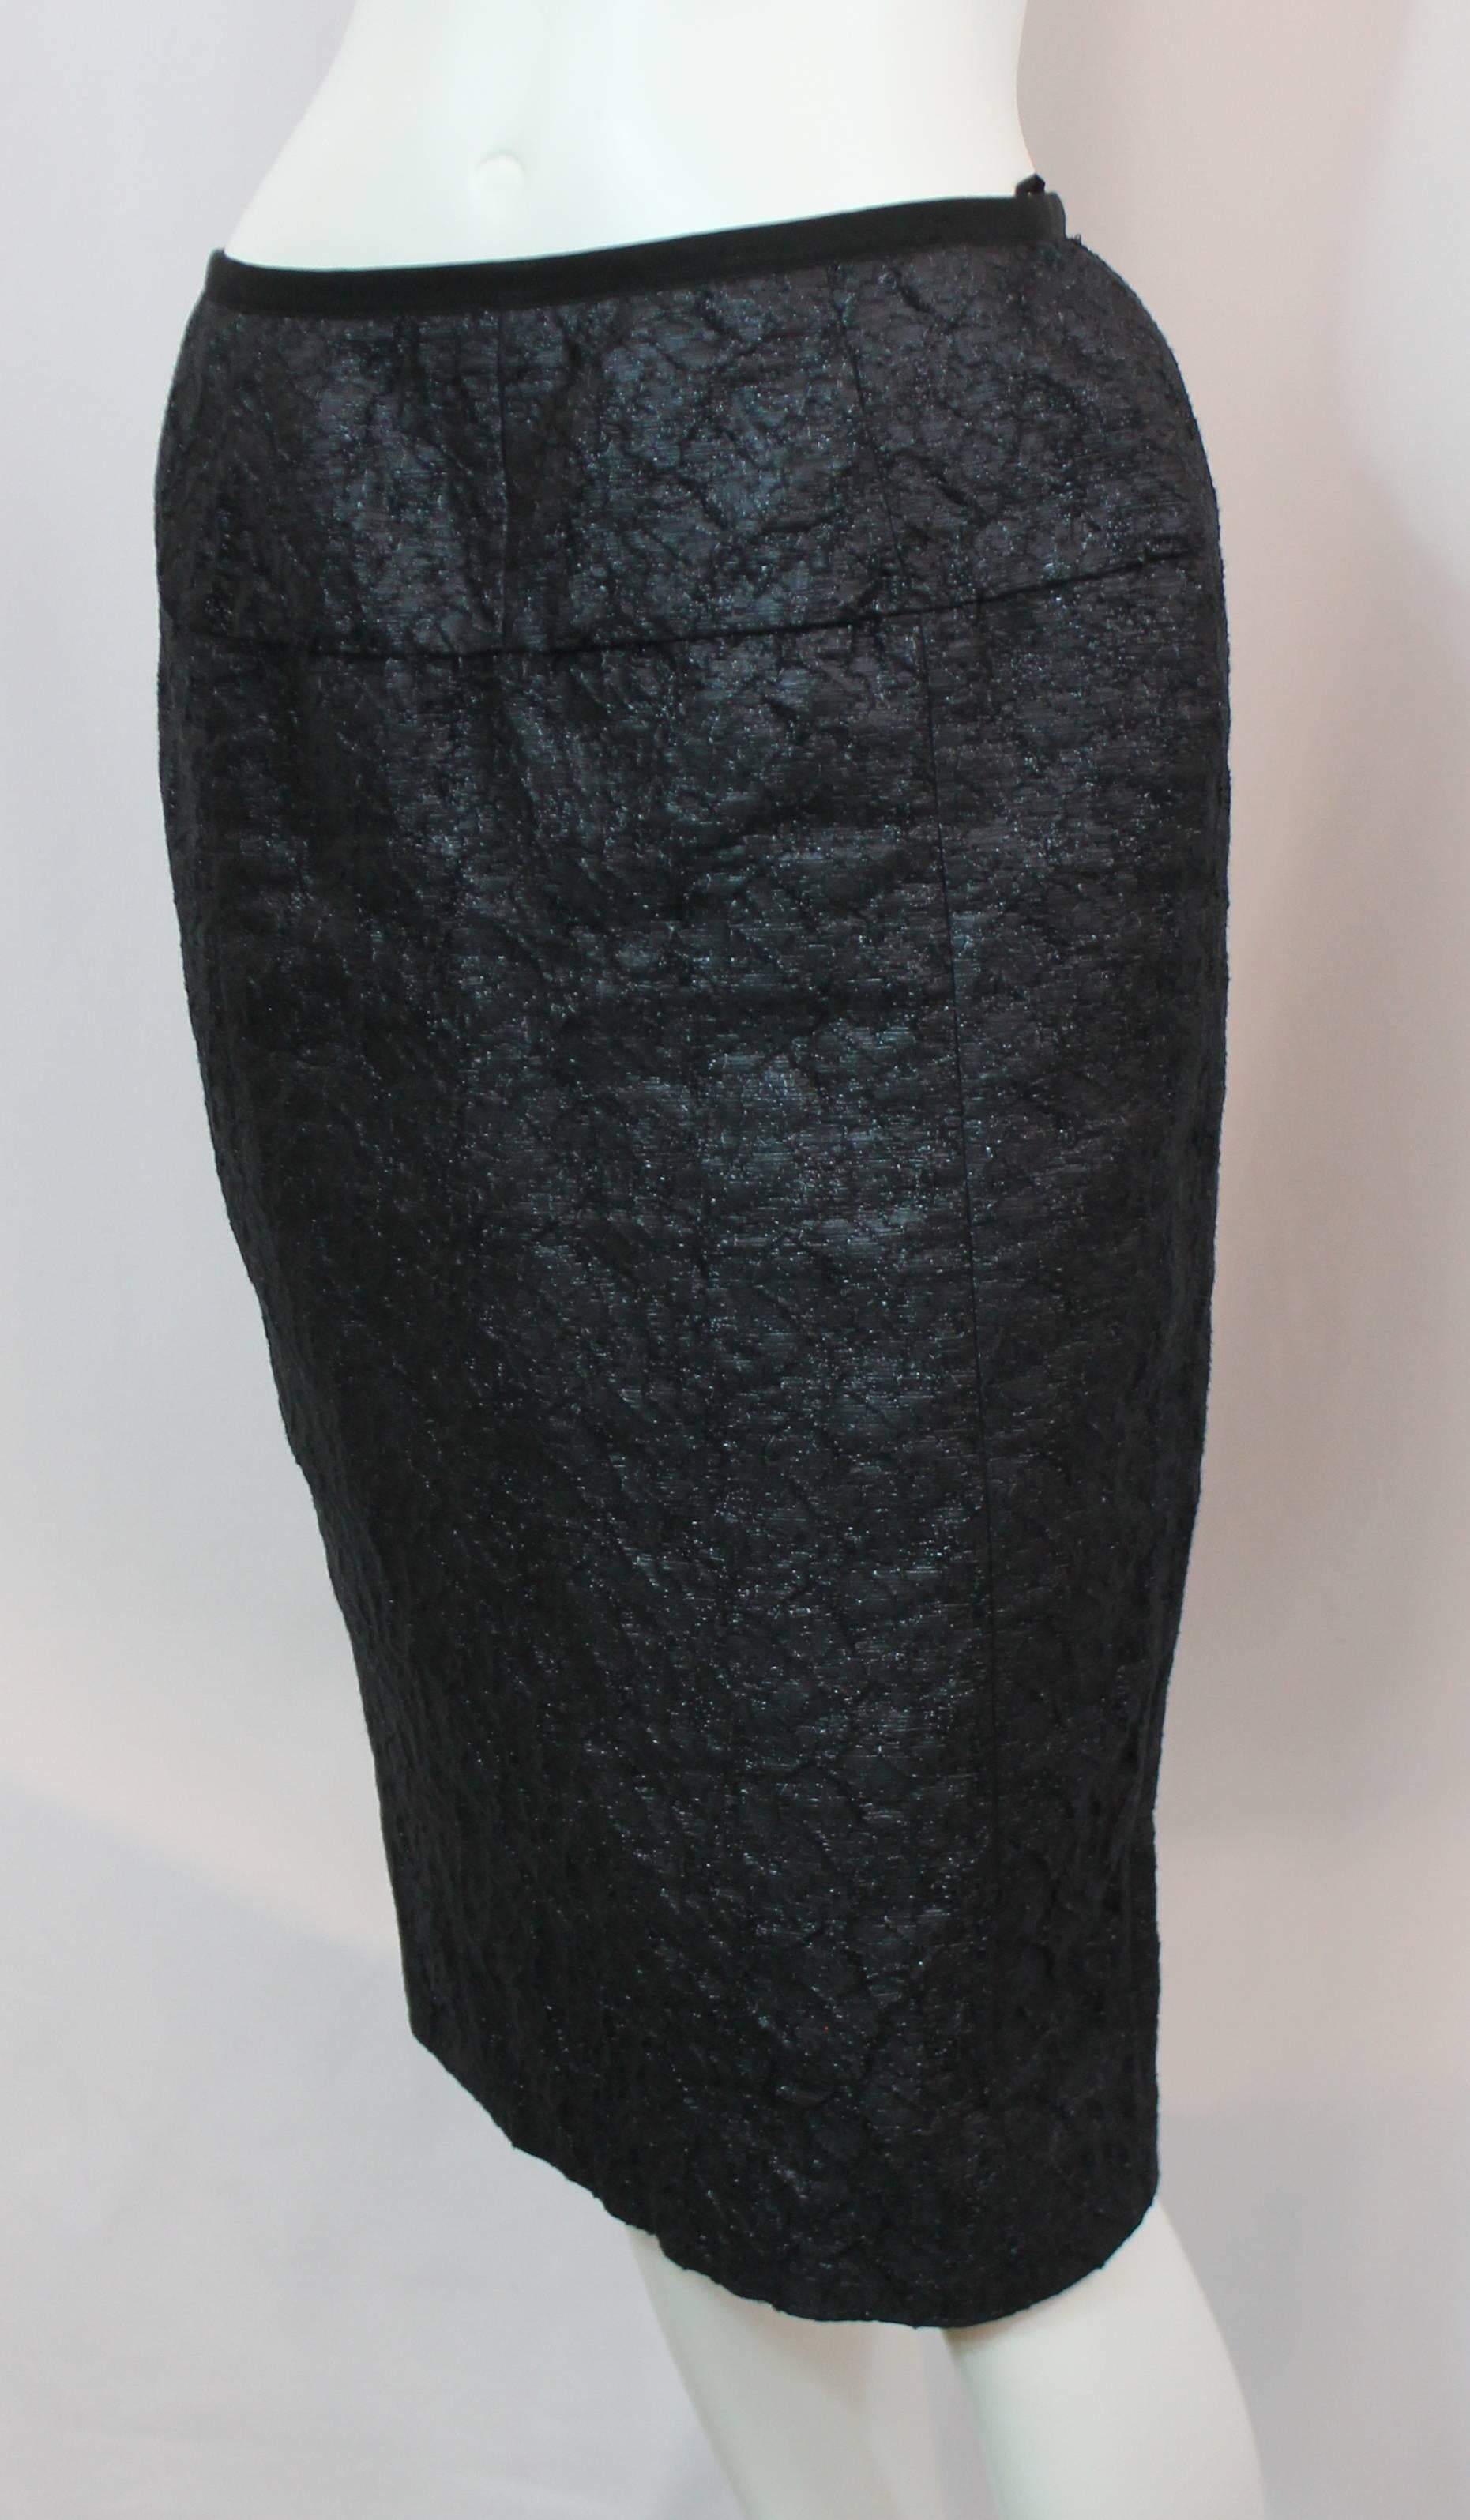 Nina Ricci Dark Navy Linen with Metallic Sheen Blend Brocade Skirt - 40. This dark navy skirt is made of a linen-silk blend. It is scrunched brocade with black ribbon all along the waist. The zipper is in the back and it is in excellent